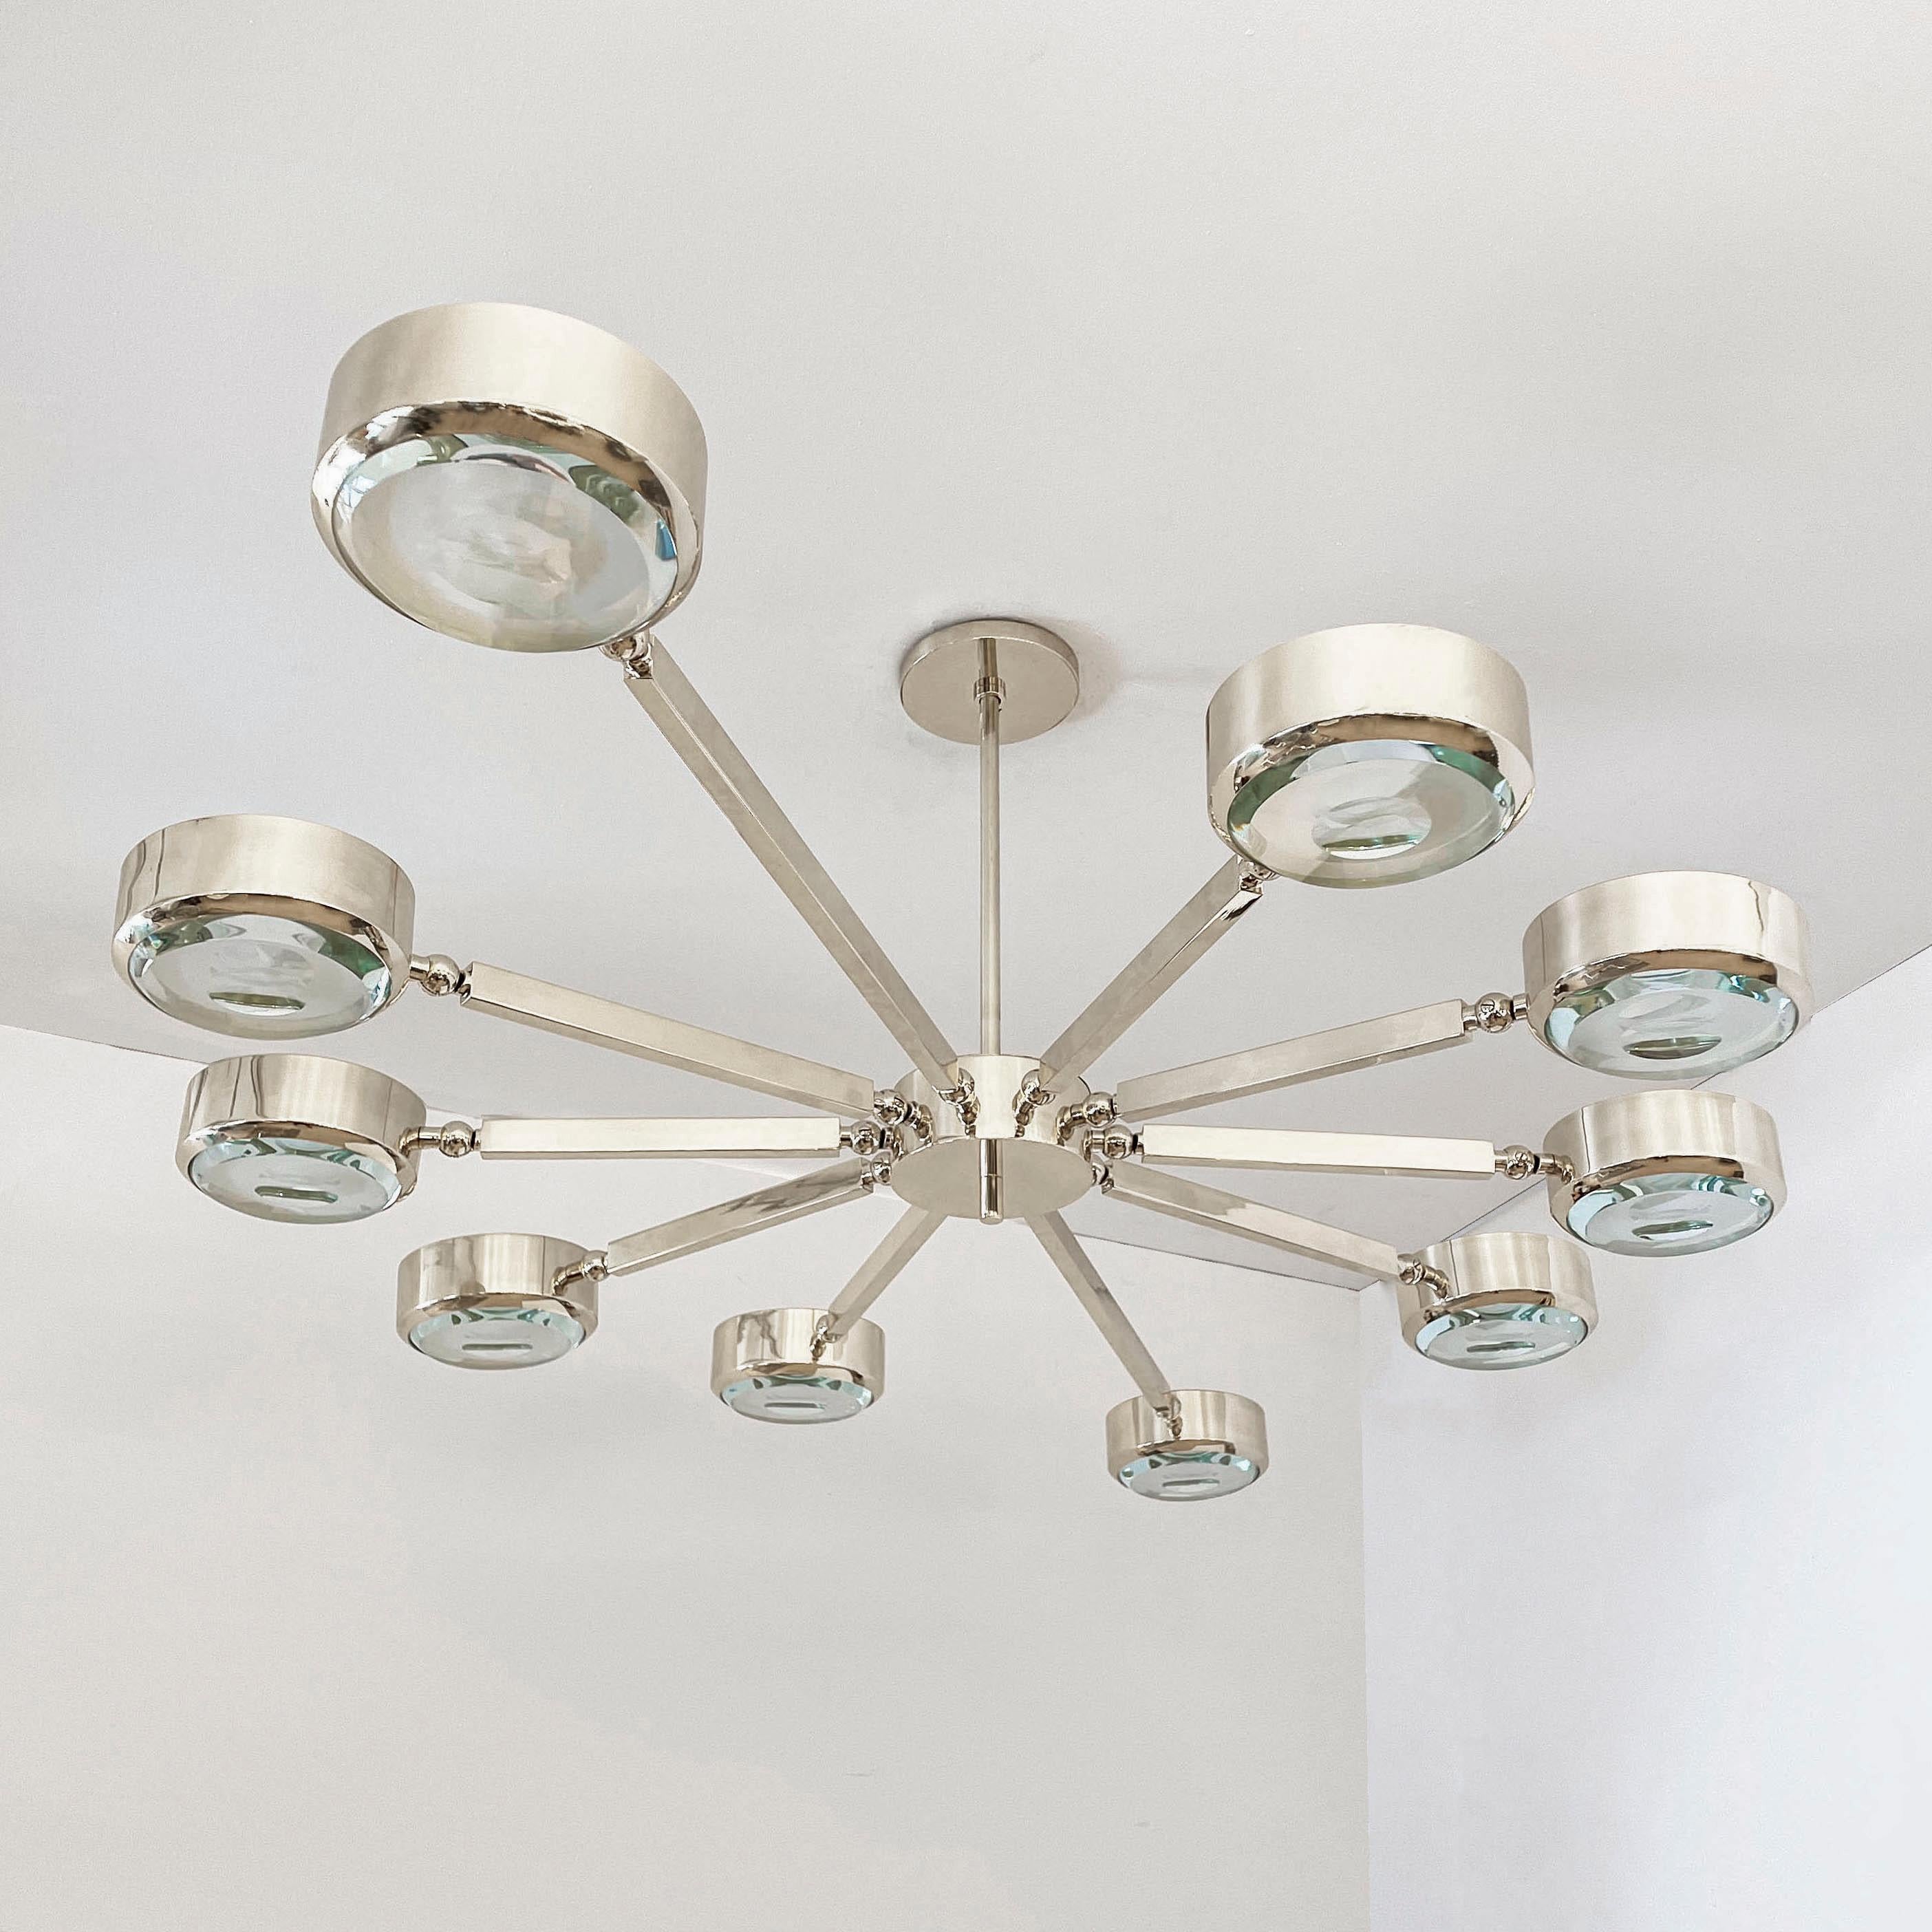 Modern Oculus Oval Ceiling Light by Gaspare Asaro- Polished Nickel with Carved Glass For Sale